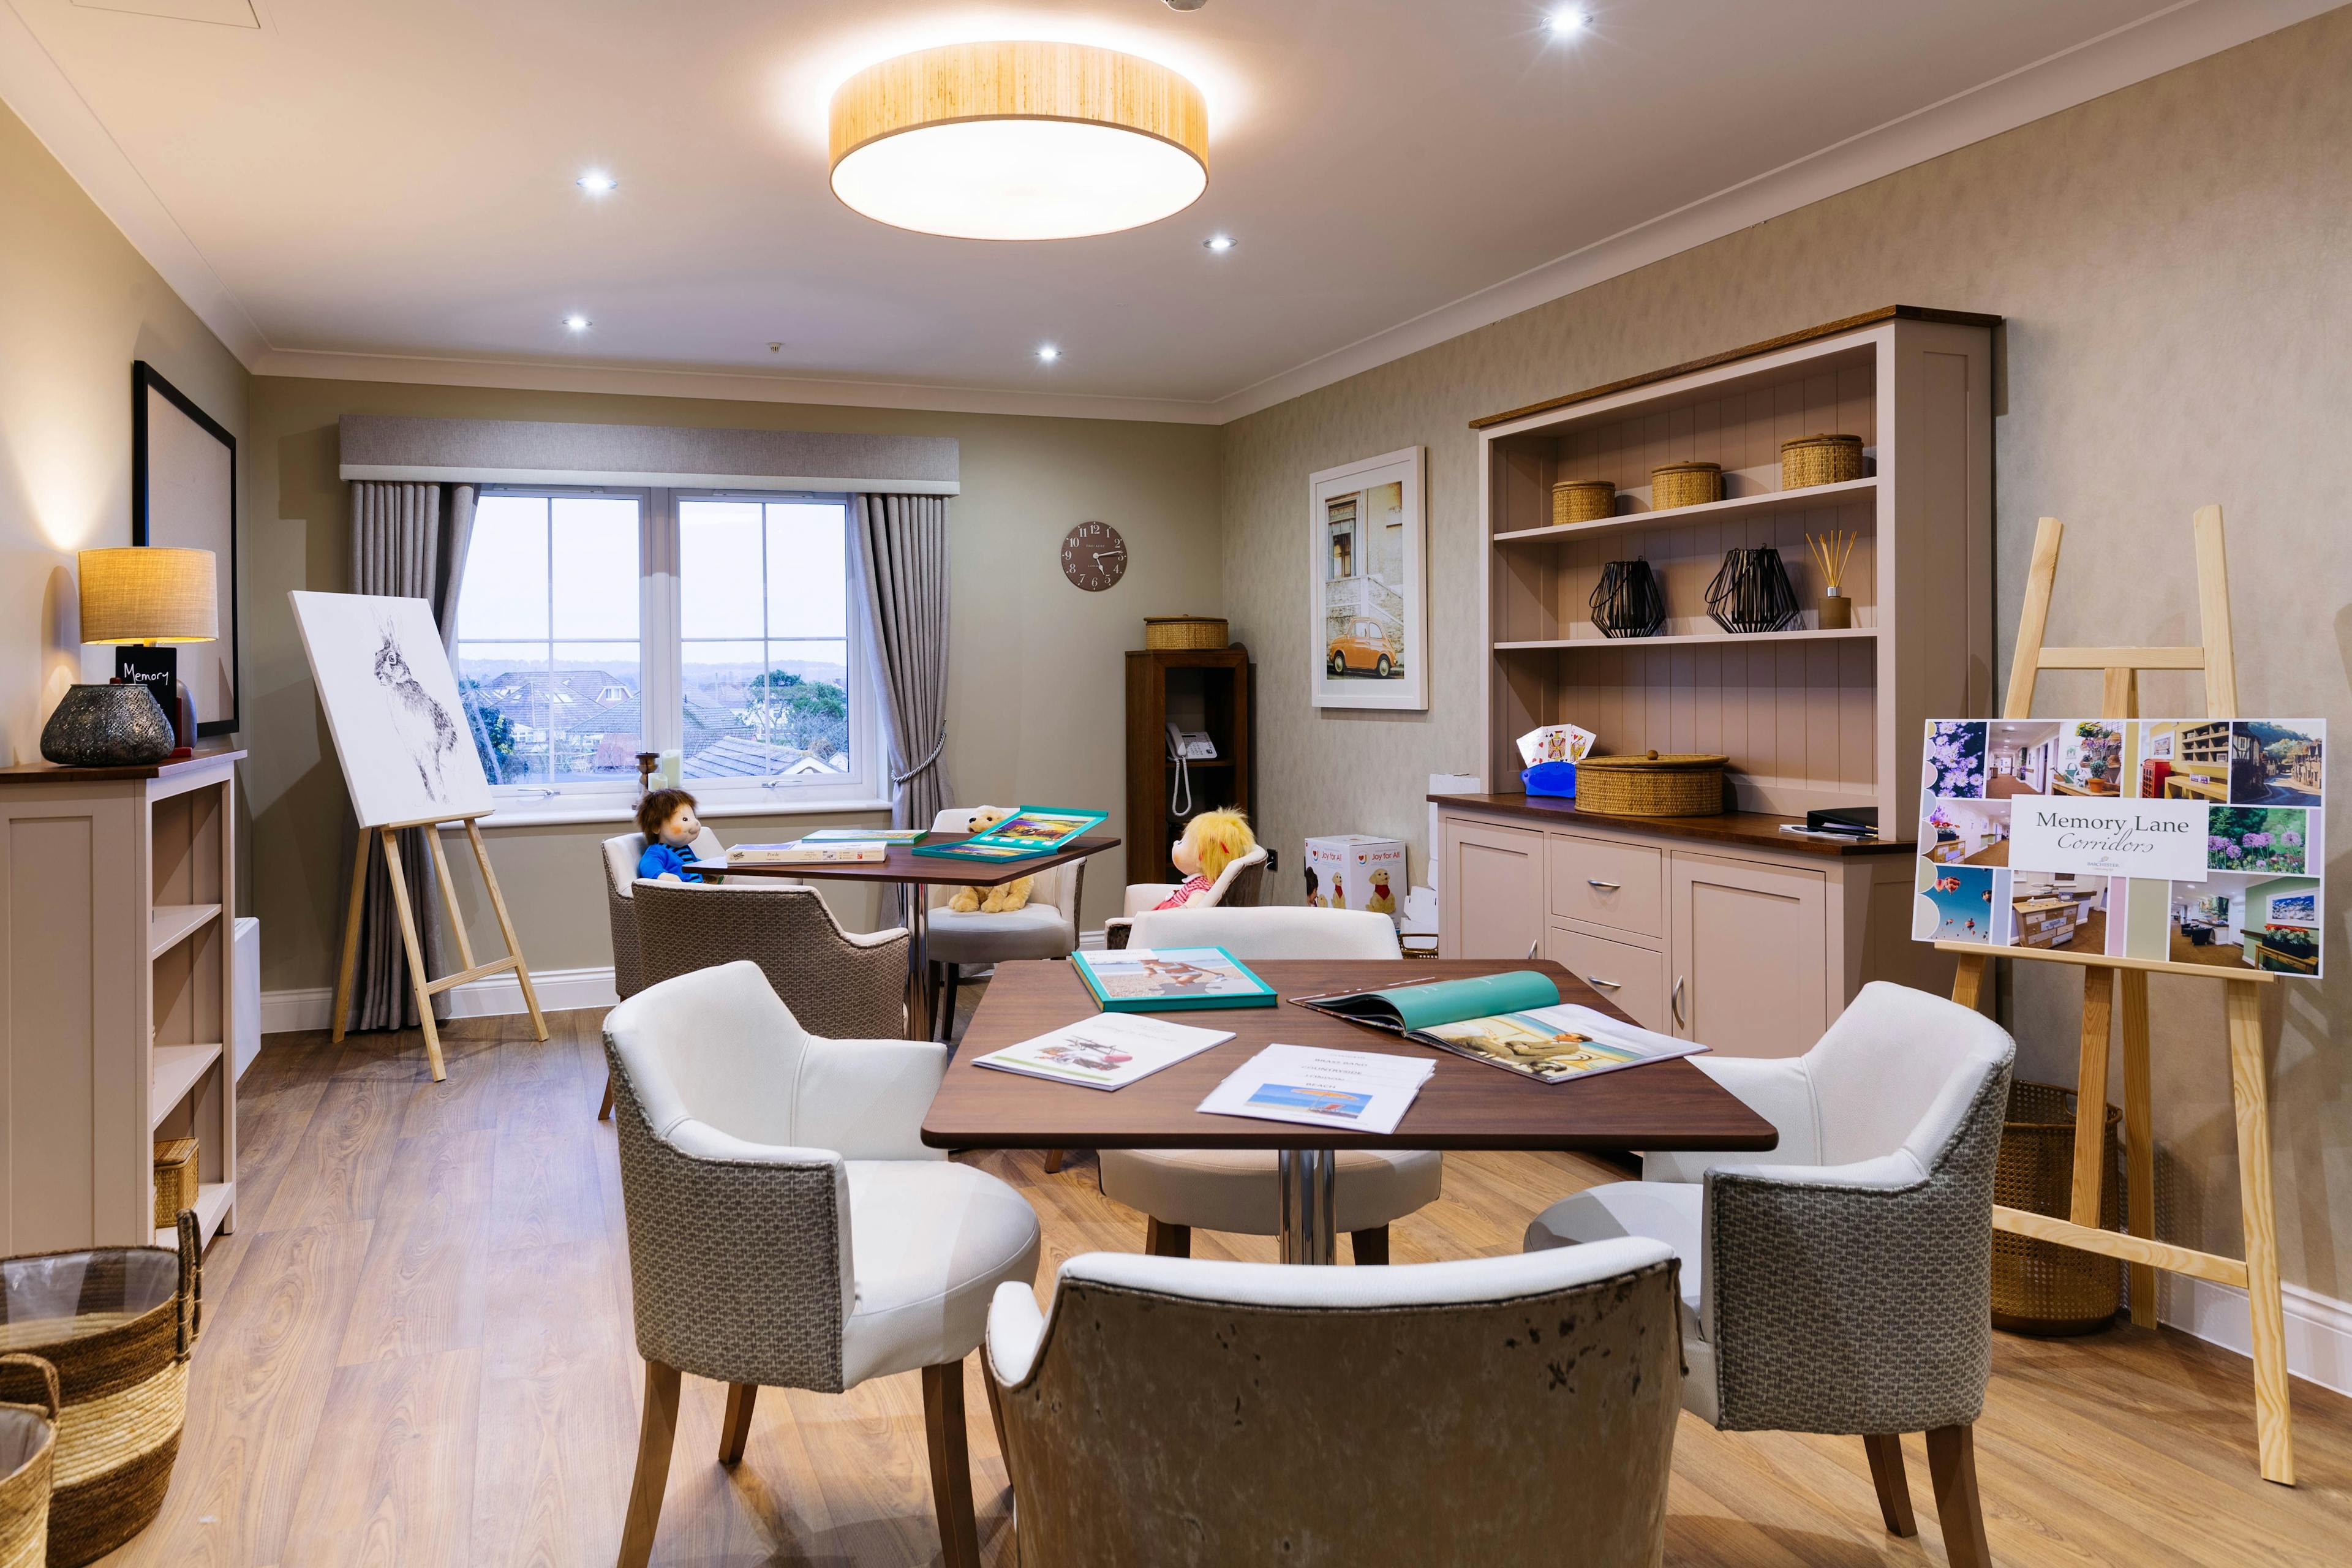 Activity Room of Upton Bay Care Home in Poole, Dorset